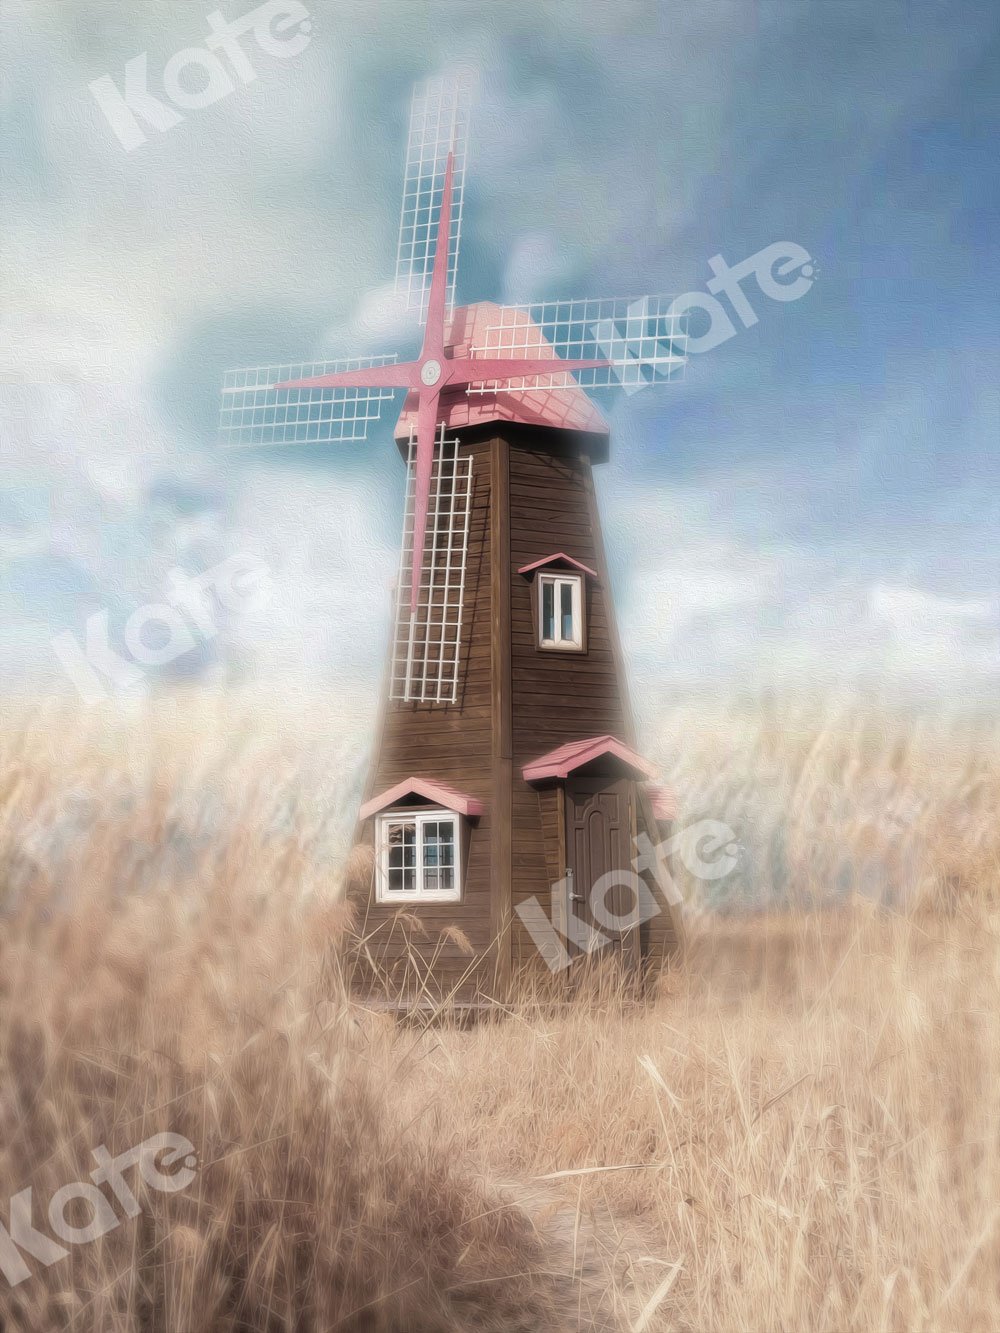 Kate Fall Backdrop Wheatfield Pink Windmill for Photography